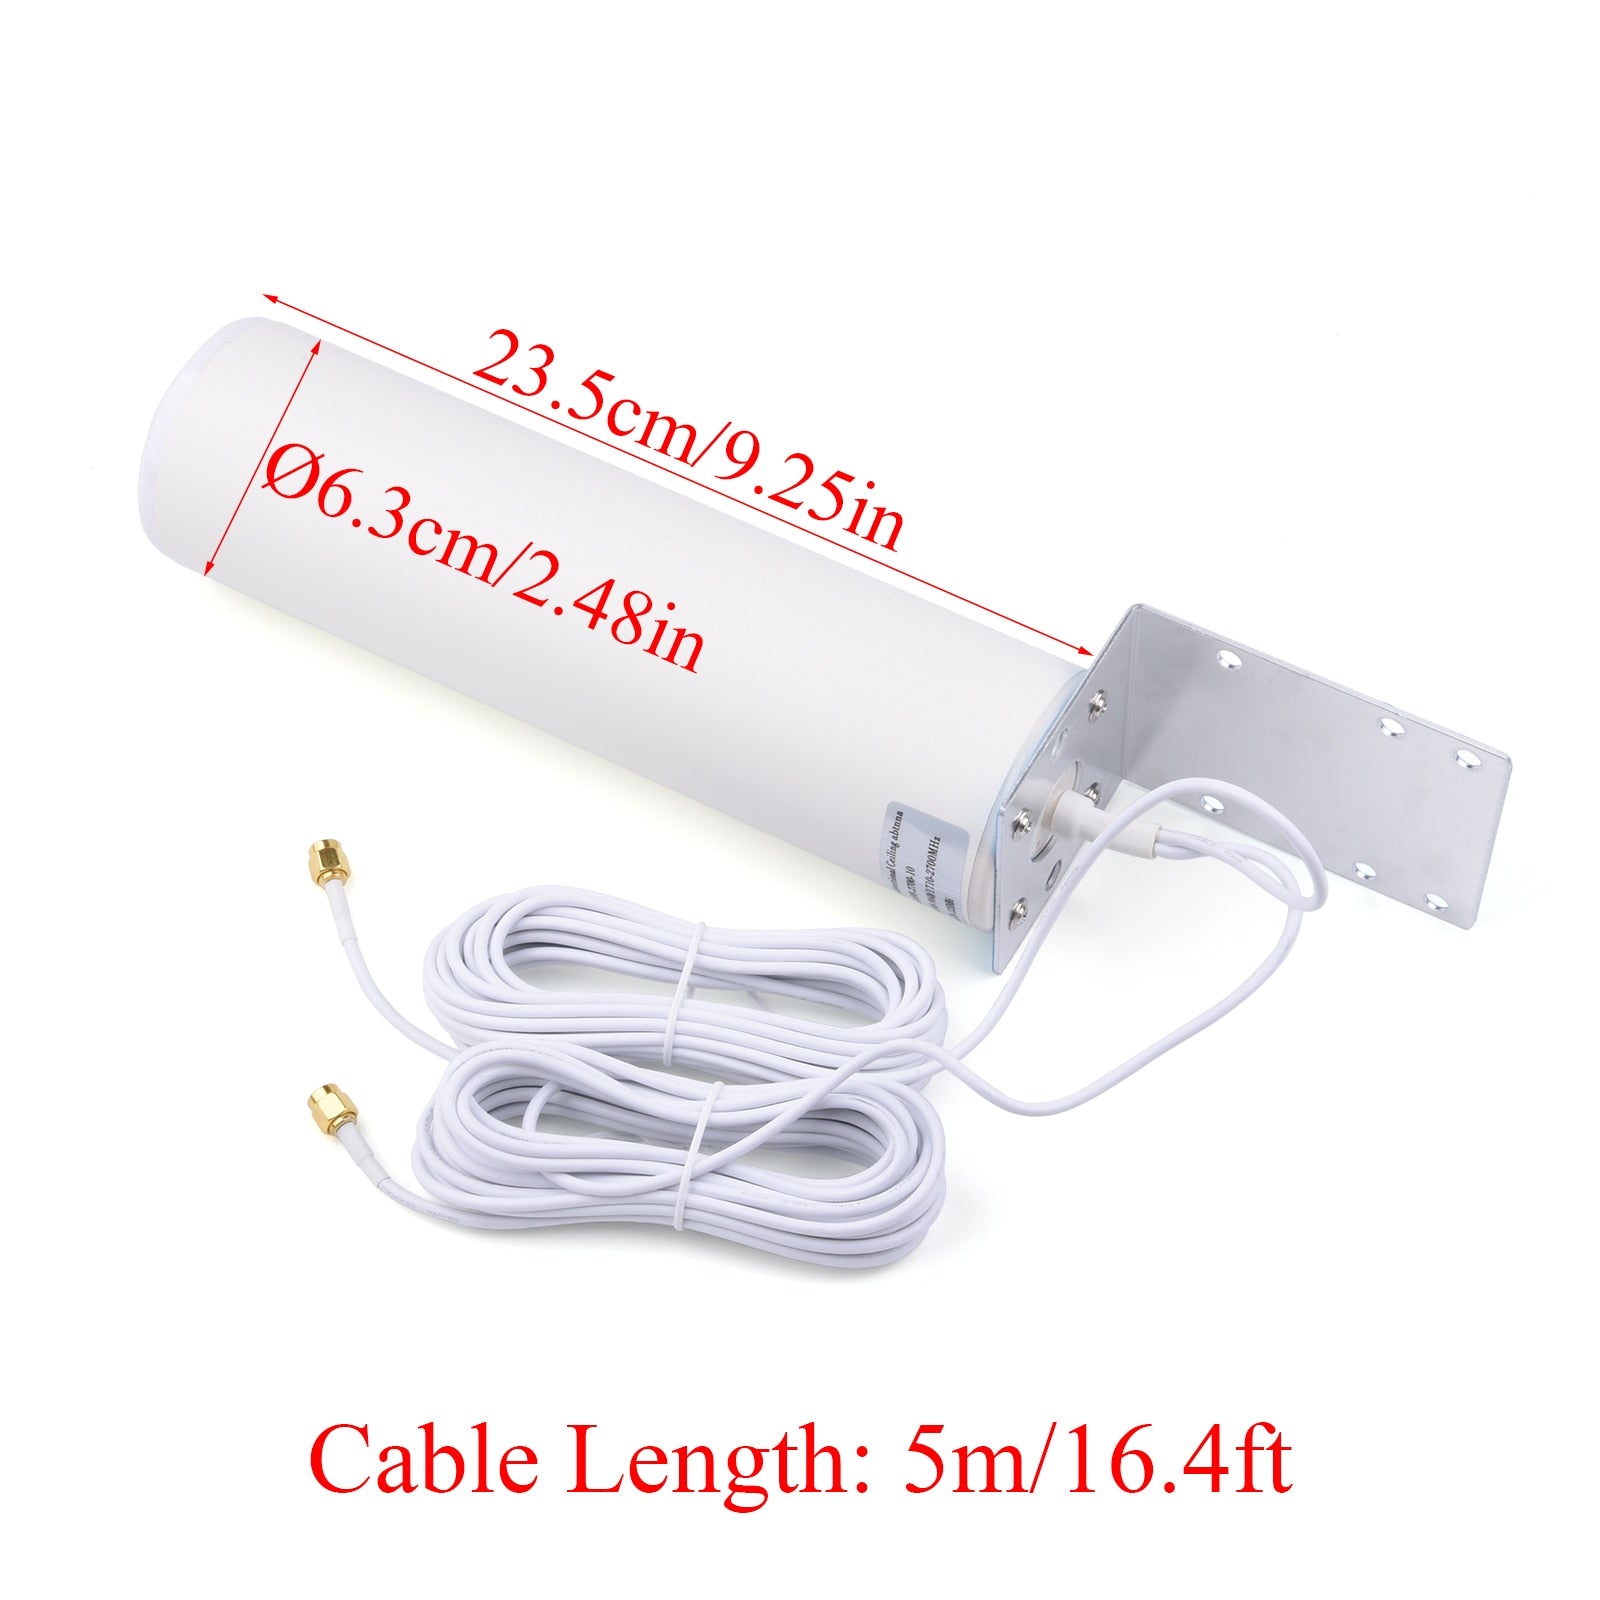 FR&RU Warehouse 10-12dBi 4G LTE Antenna 698-2700MHz 4G 3G 2G Outdoor Antenna Dual SMA Male 5m/16.4ft Cable For Modem Router